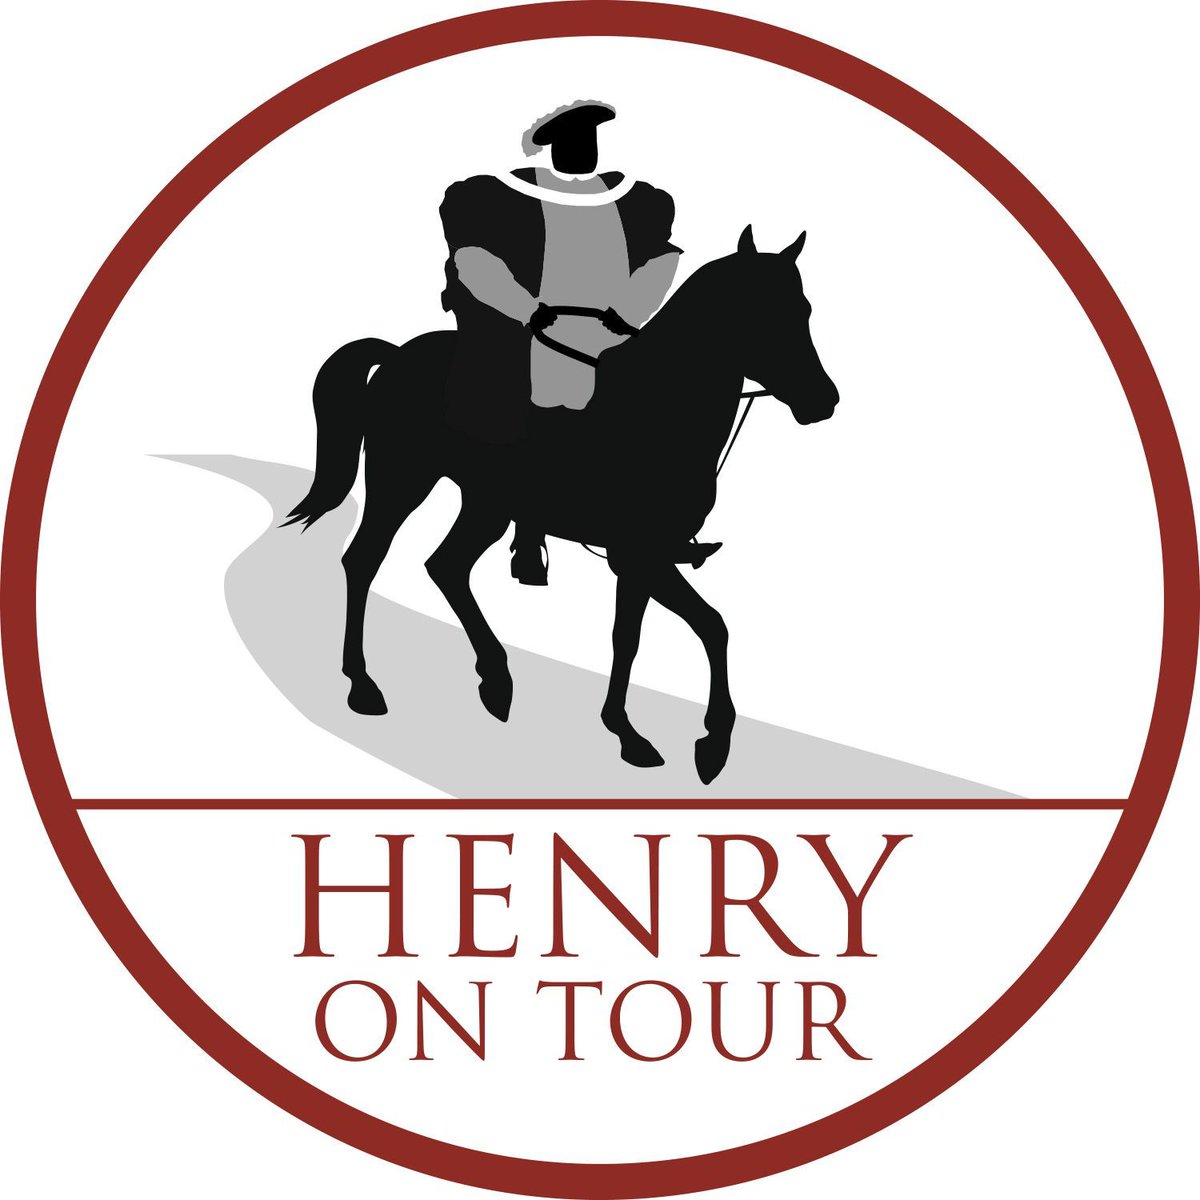 It's official! @HRP_palaces fabulous 'Henry on Tour' @henryVIIIonTour is coming to Exeter! And we are part of the event 😃 Have a look at what's going on in the city buff.ly/3wfLNbz @exeter_hour @visitexeter @exetercathedral @dexinstitution